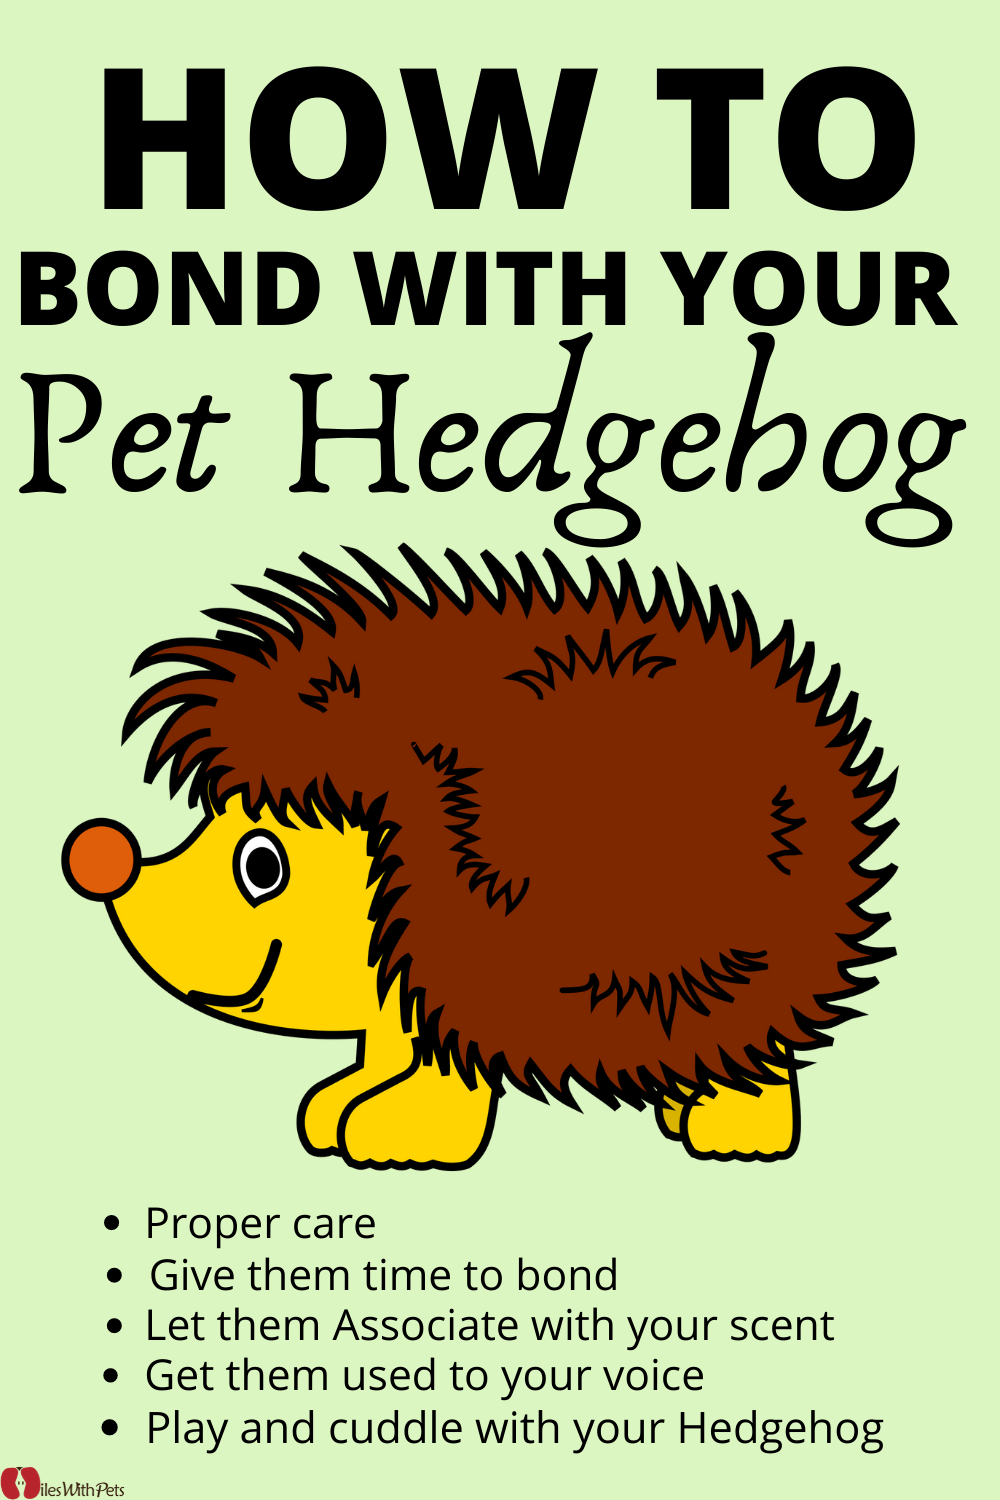 How to Bond With Your Hedgehog